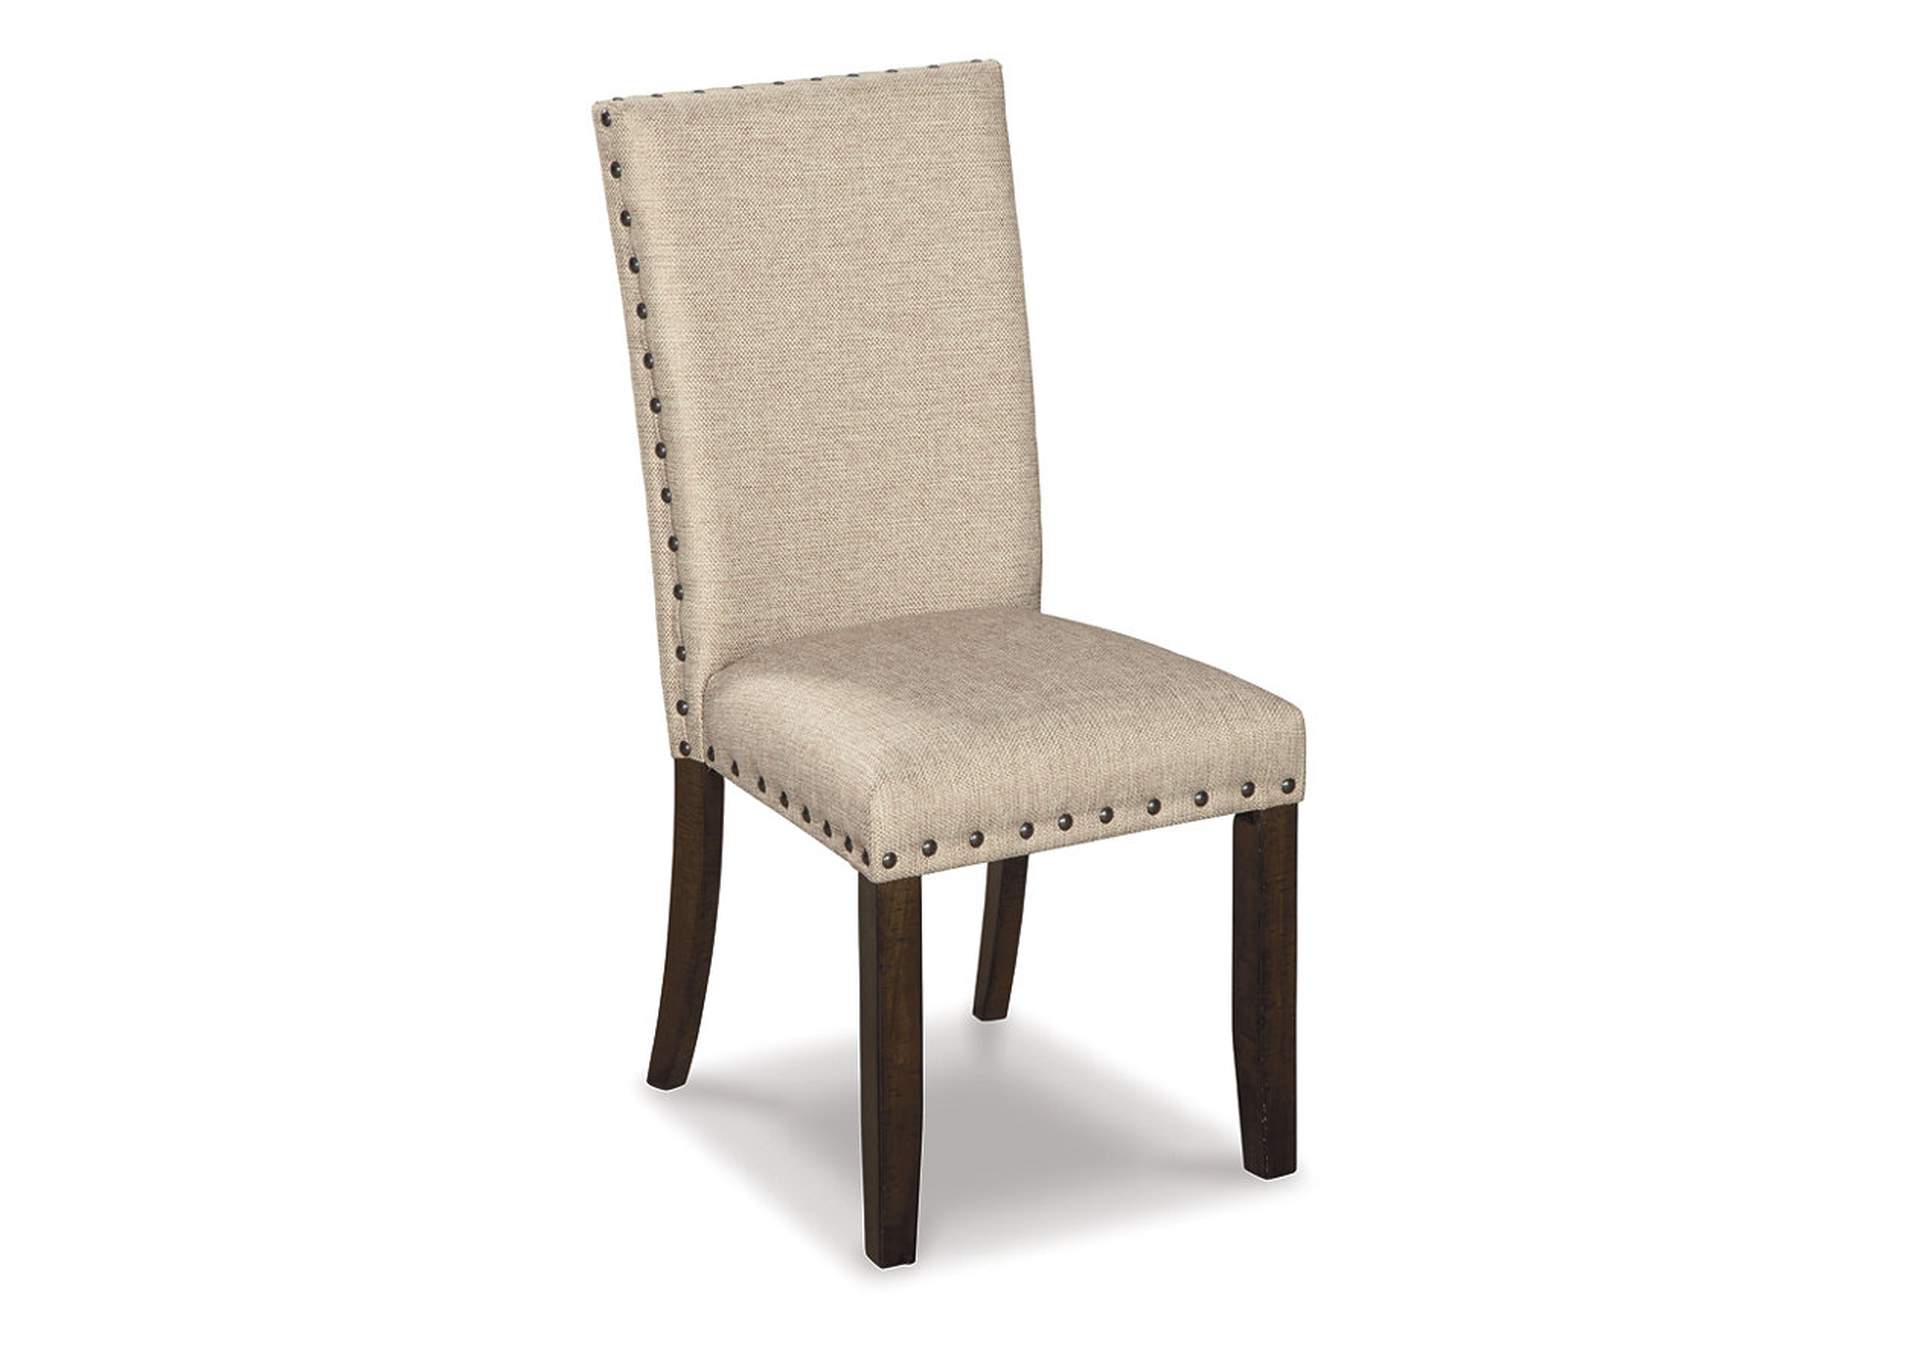 Rokane Dining Chair,Signature Design By Ashley